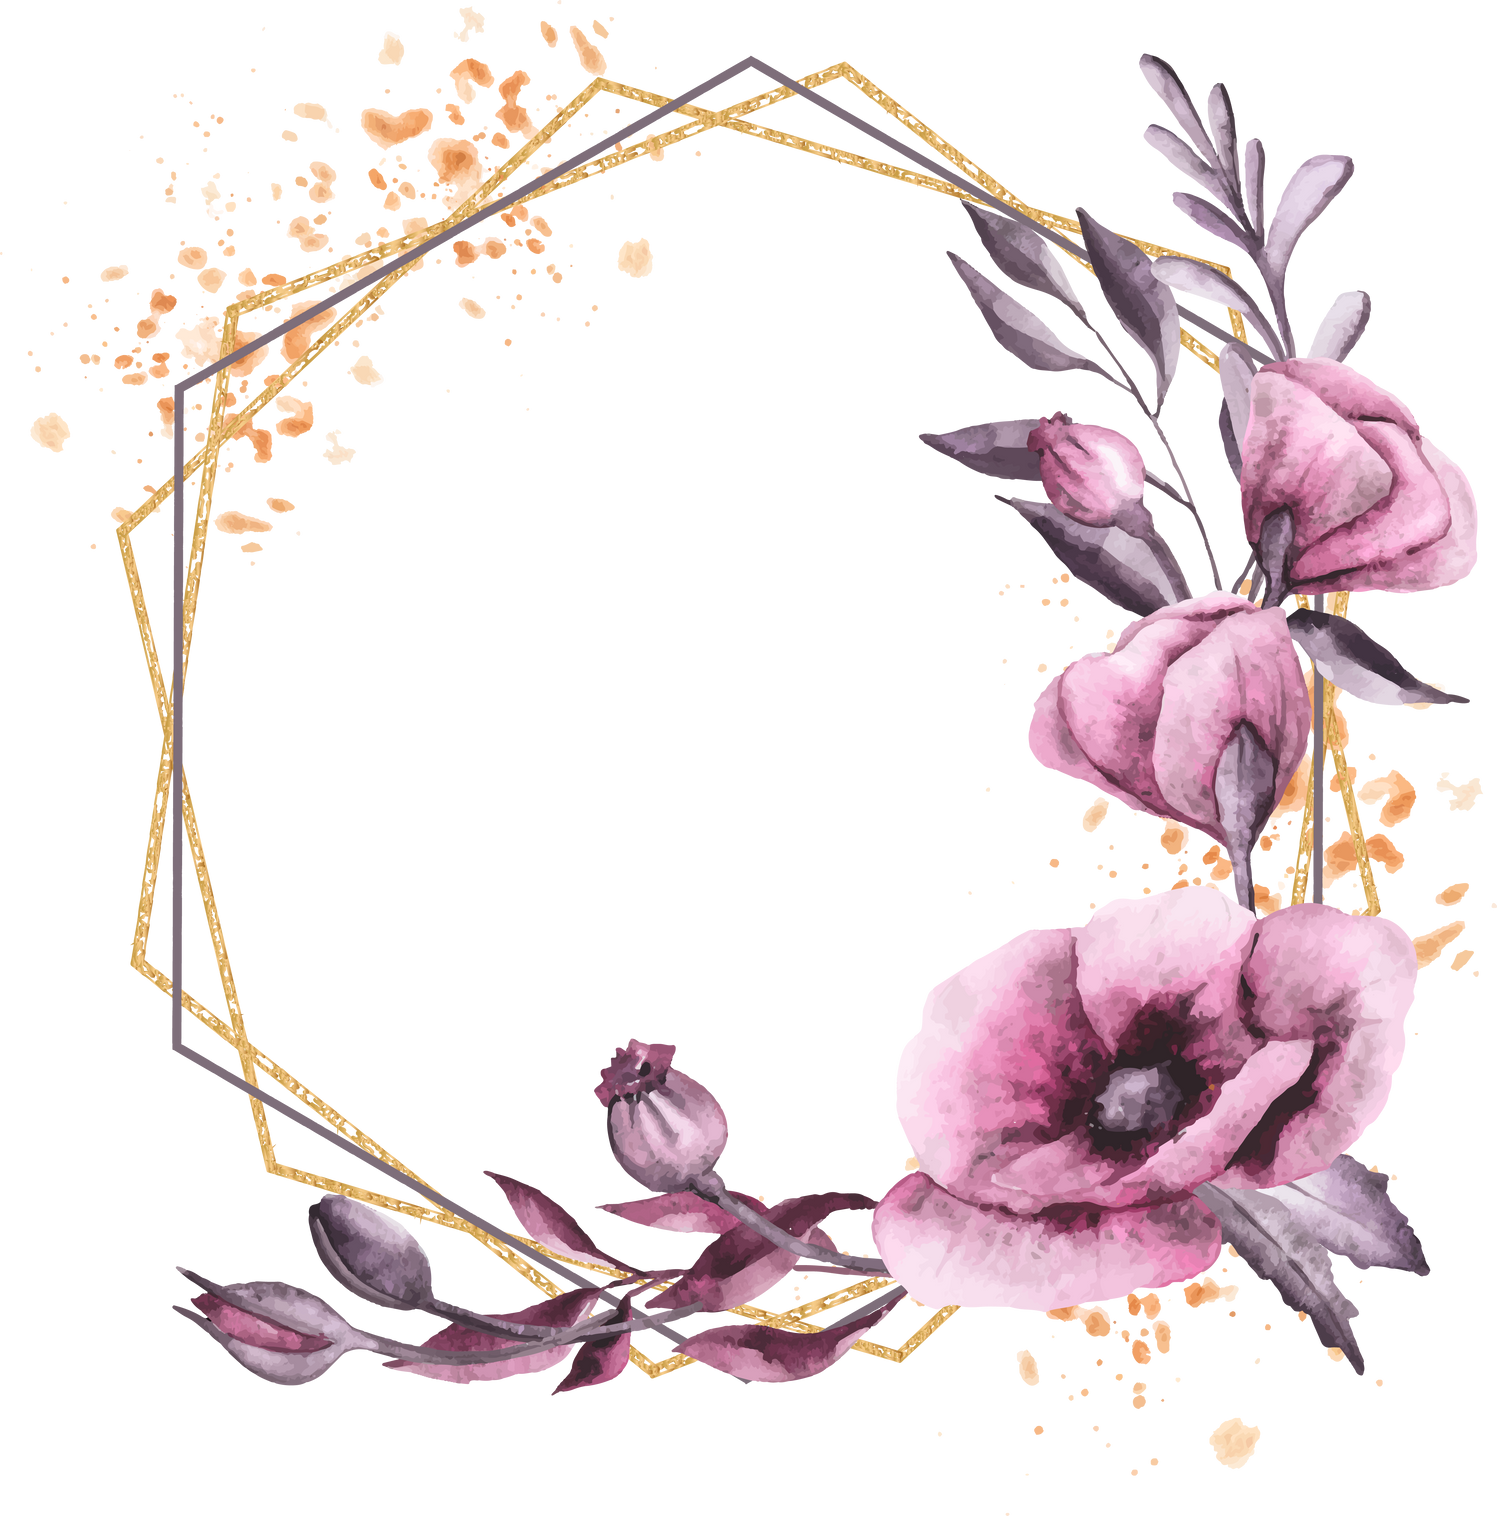 Polygonal Frame with Flowers Illustration